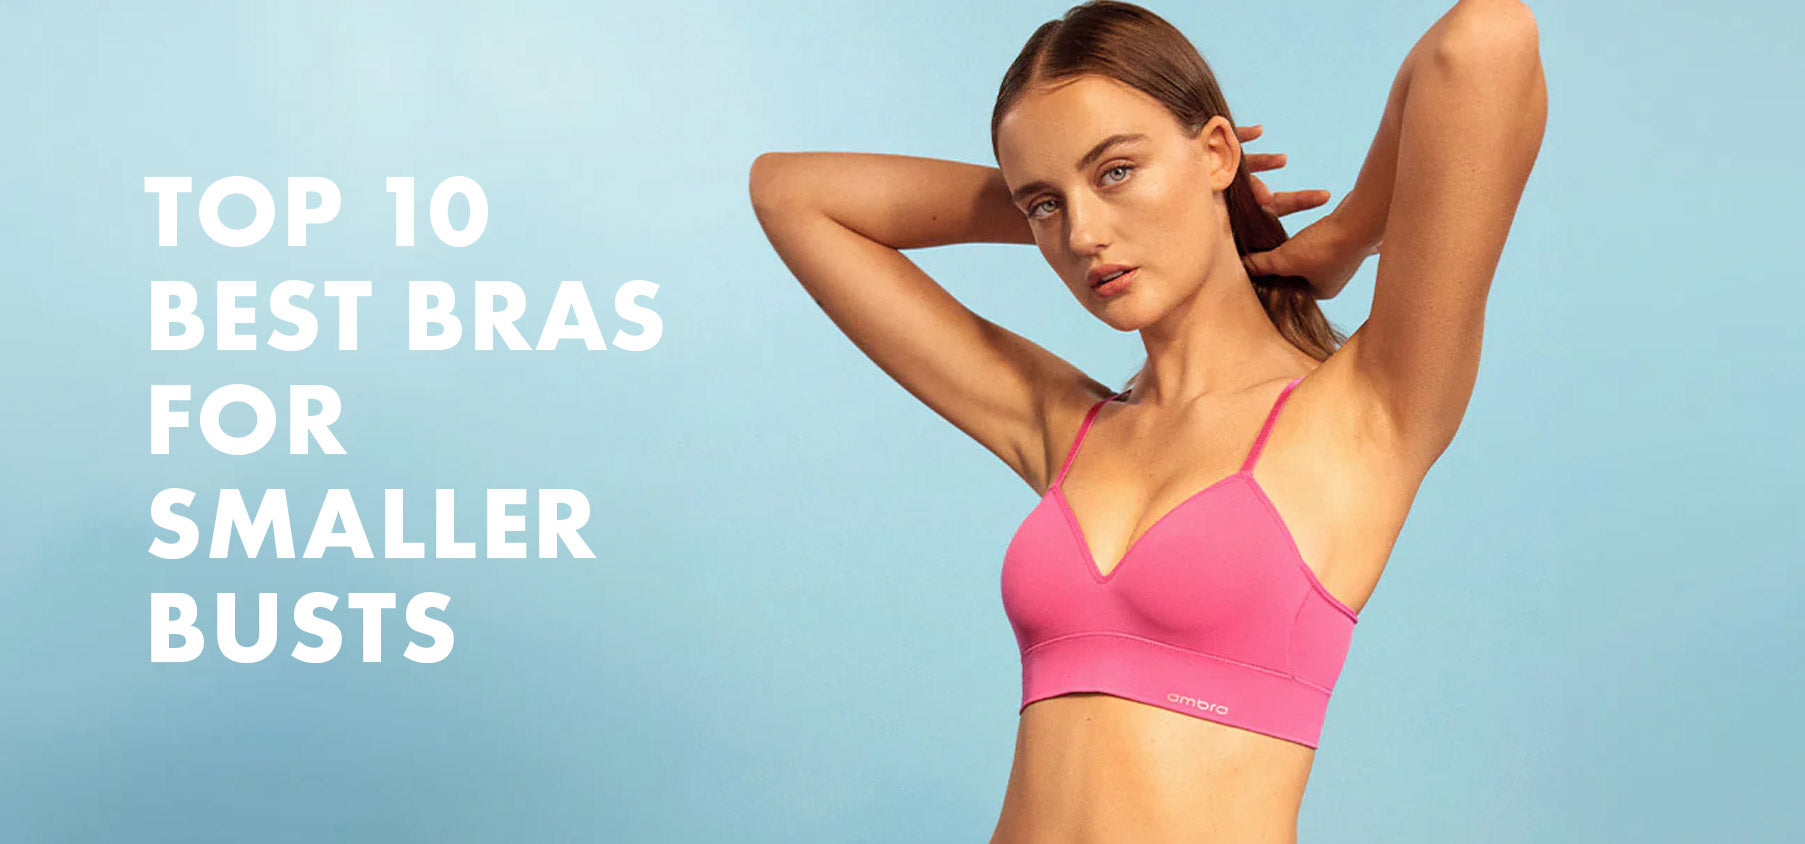 The Best Bras For Small Breasts